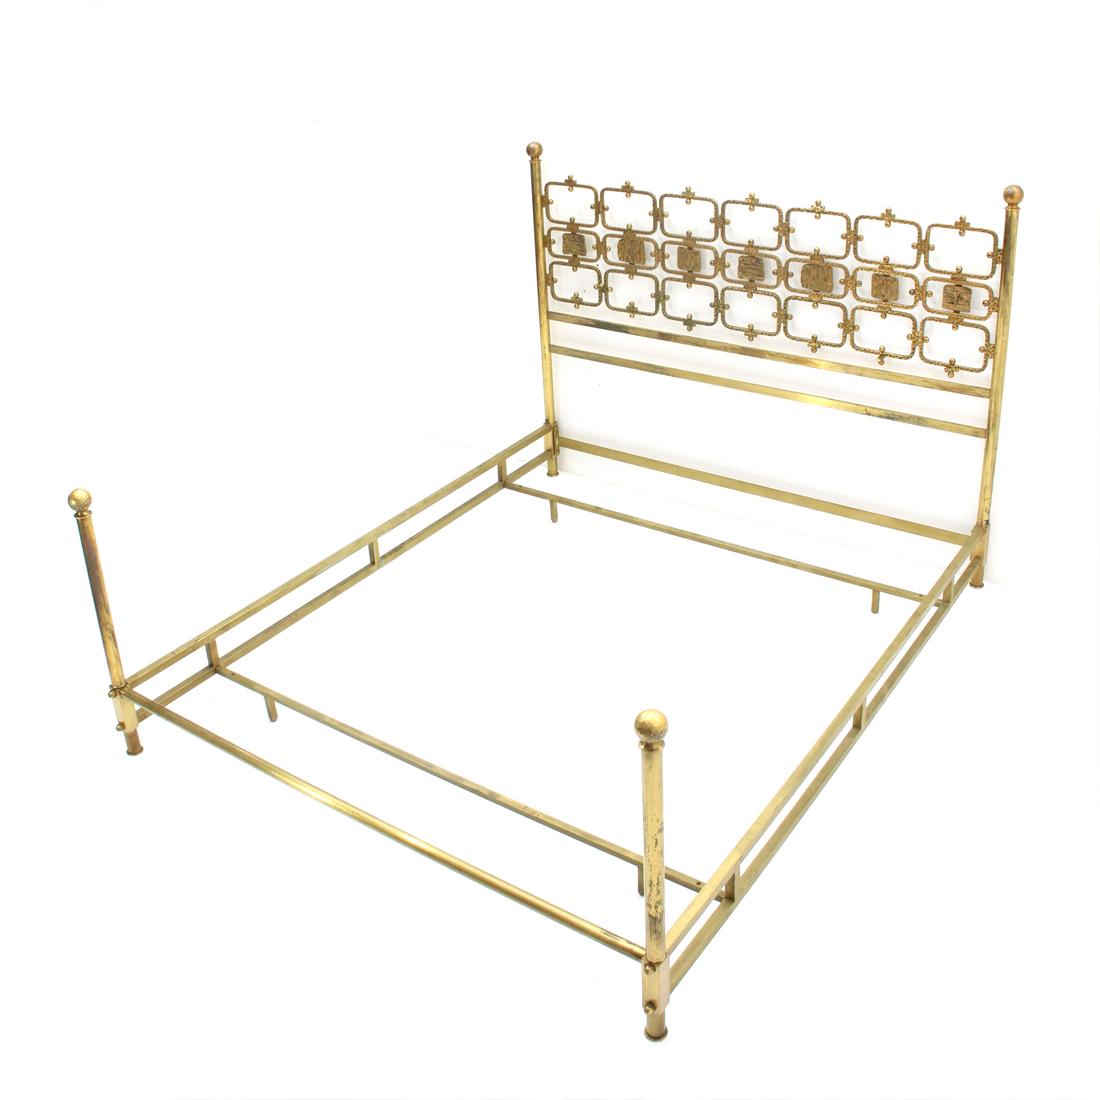 Mid-20th Century Italian Midcentury Wall Unit Brass Bed by Frigerio, 1960s